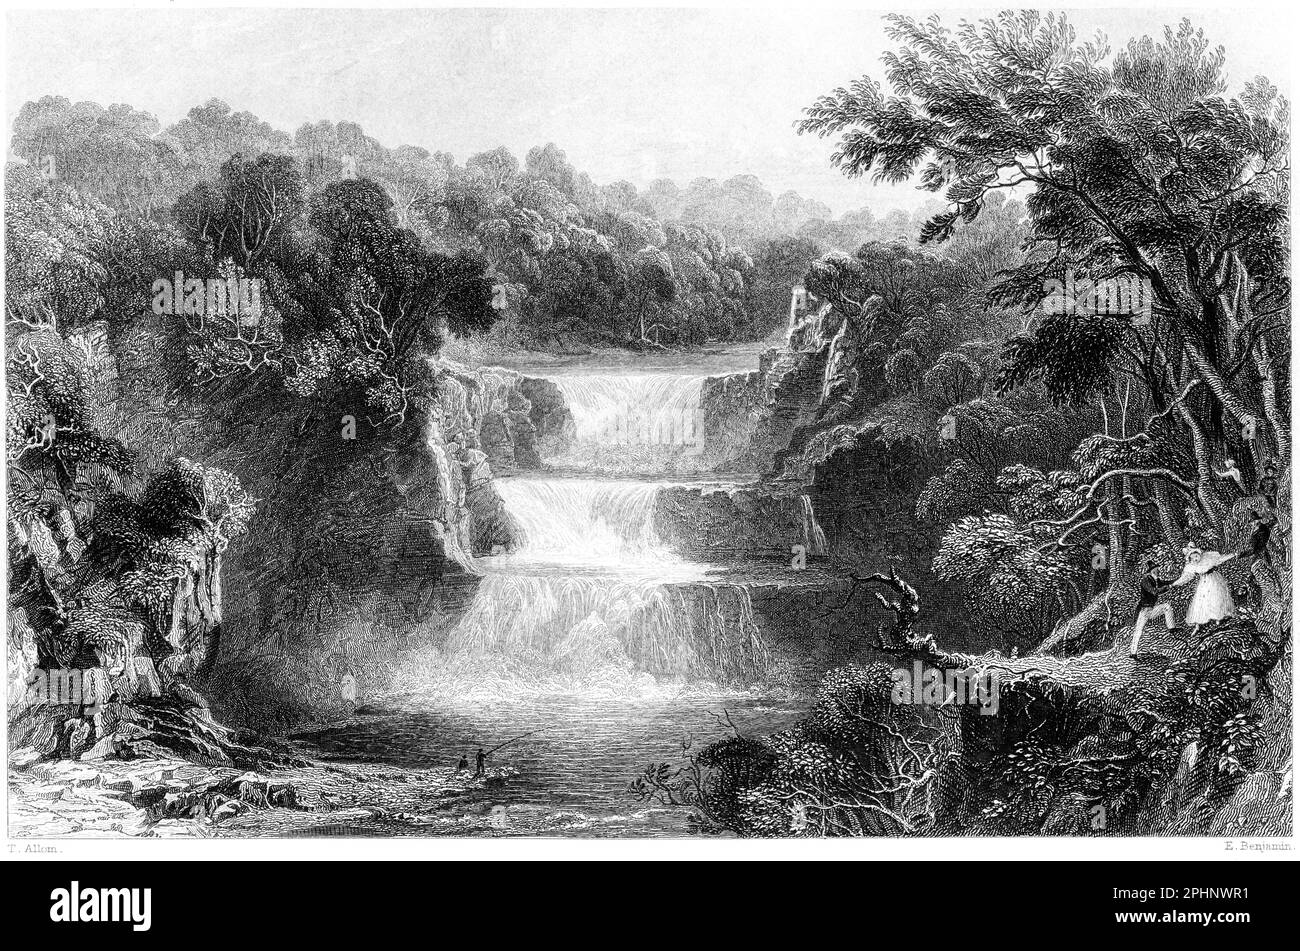 An engraving of Stonebyres Linn, Third Fall of the Clyde, Lanarkshire, Scotland UK scanned at high resolution from a book printed in 1840. Stock Photo